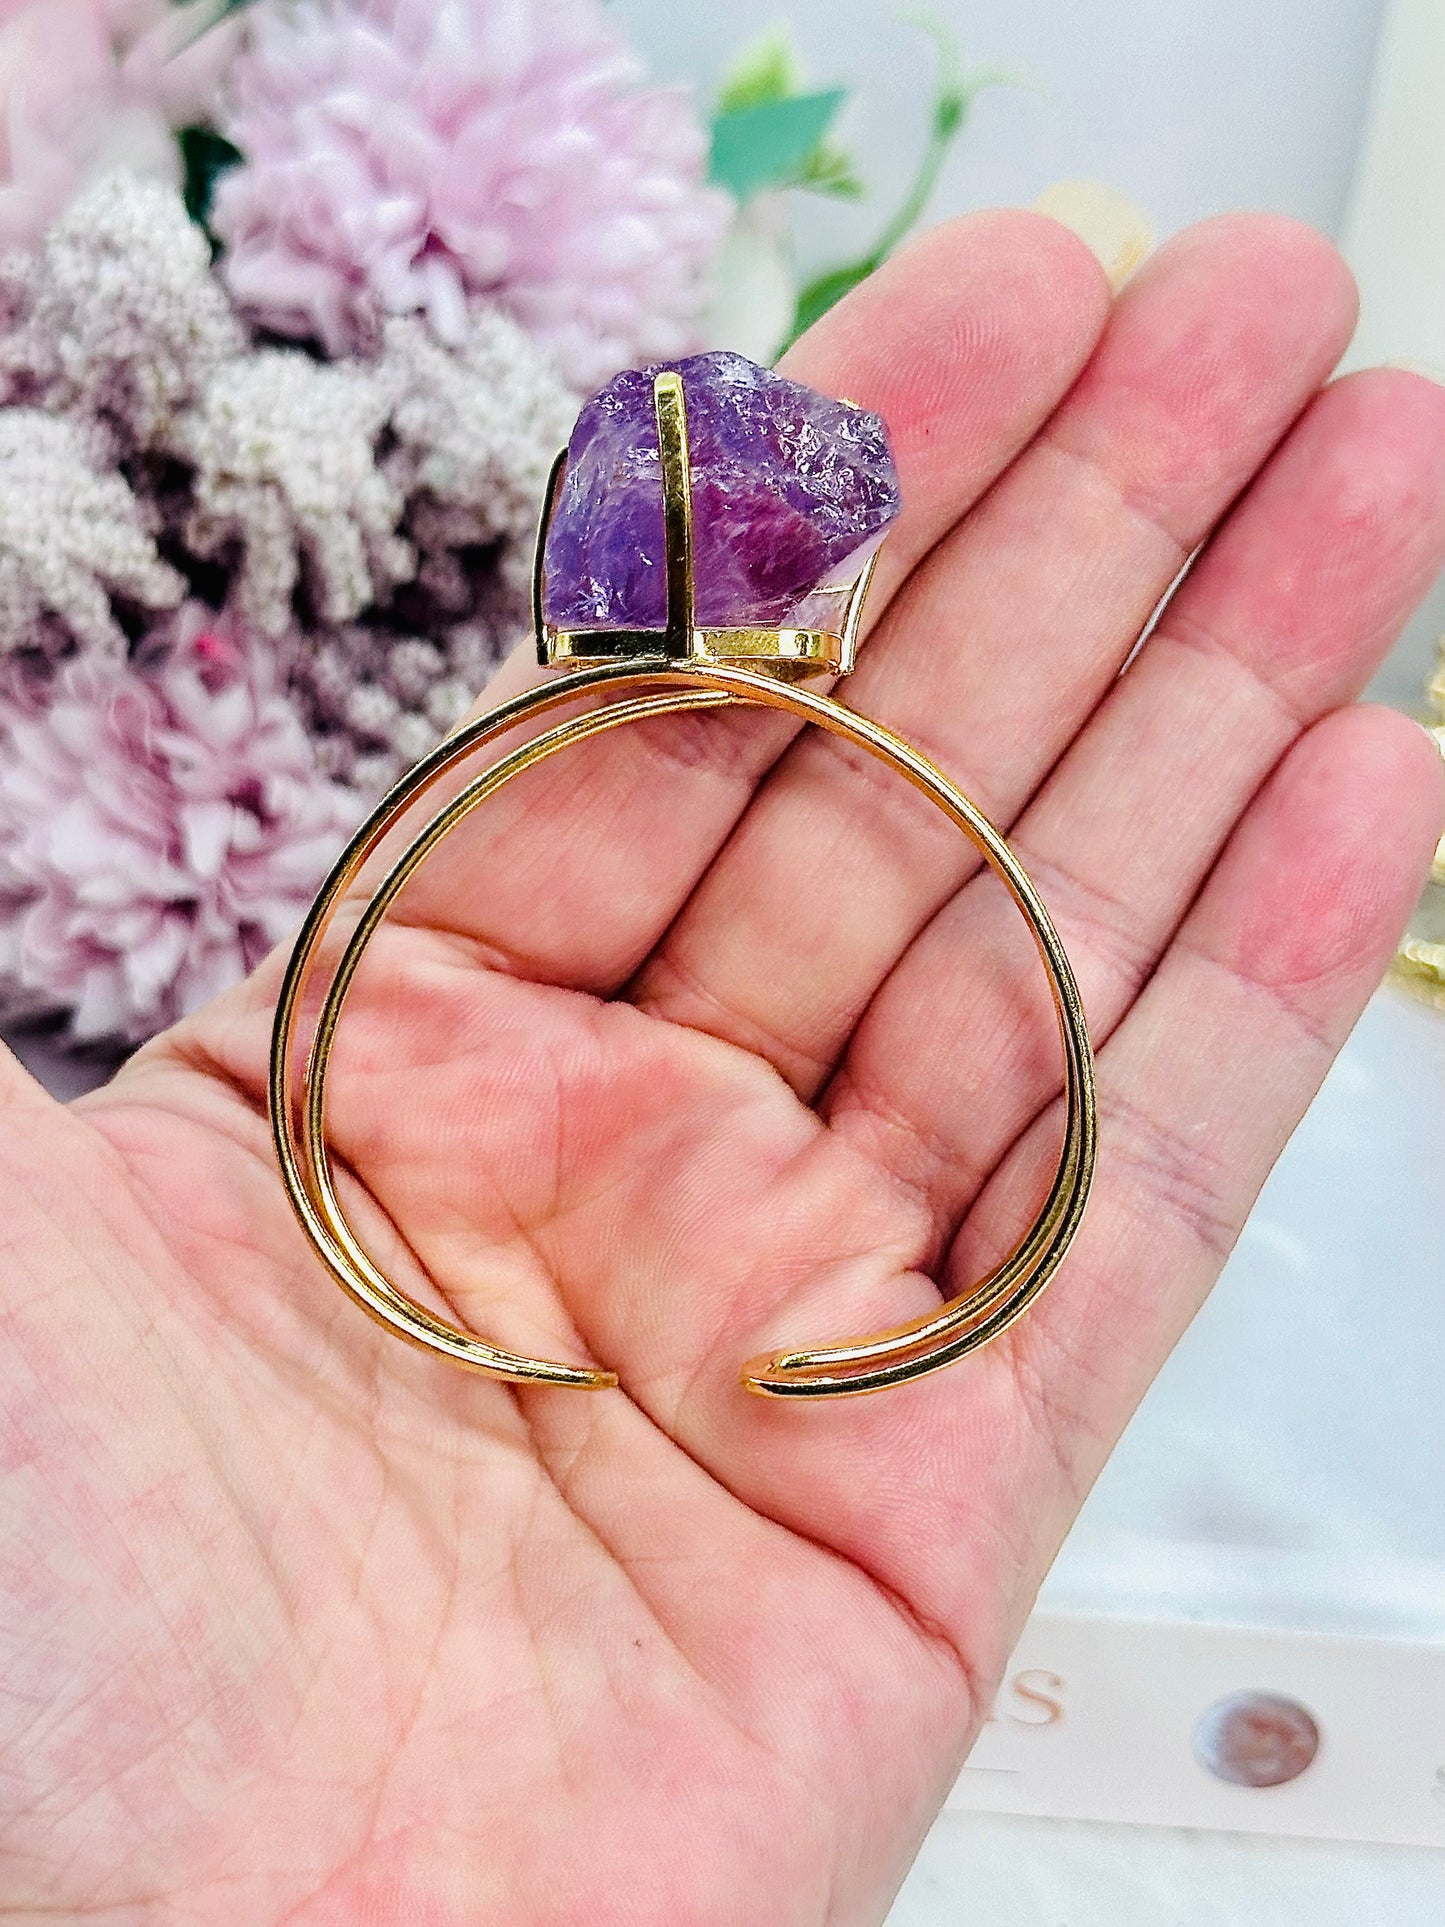 Simply Stunning High Grade Chunky Amethyst Gold Plated Bracelet From Brazil In Gift Bag